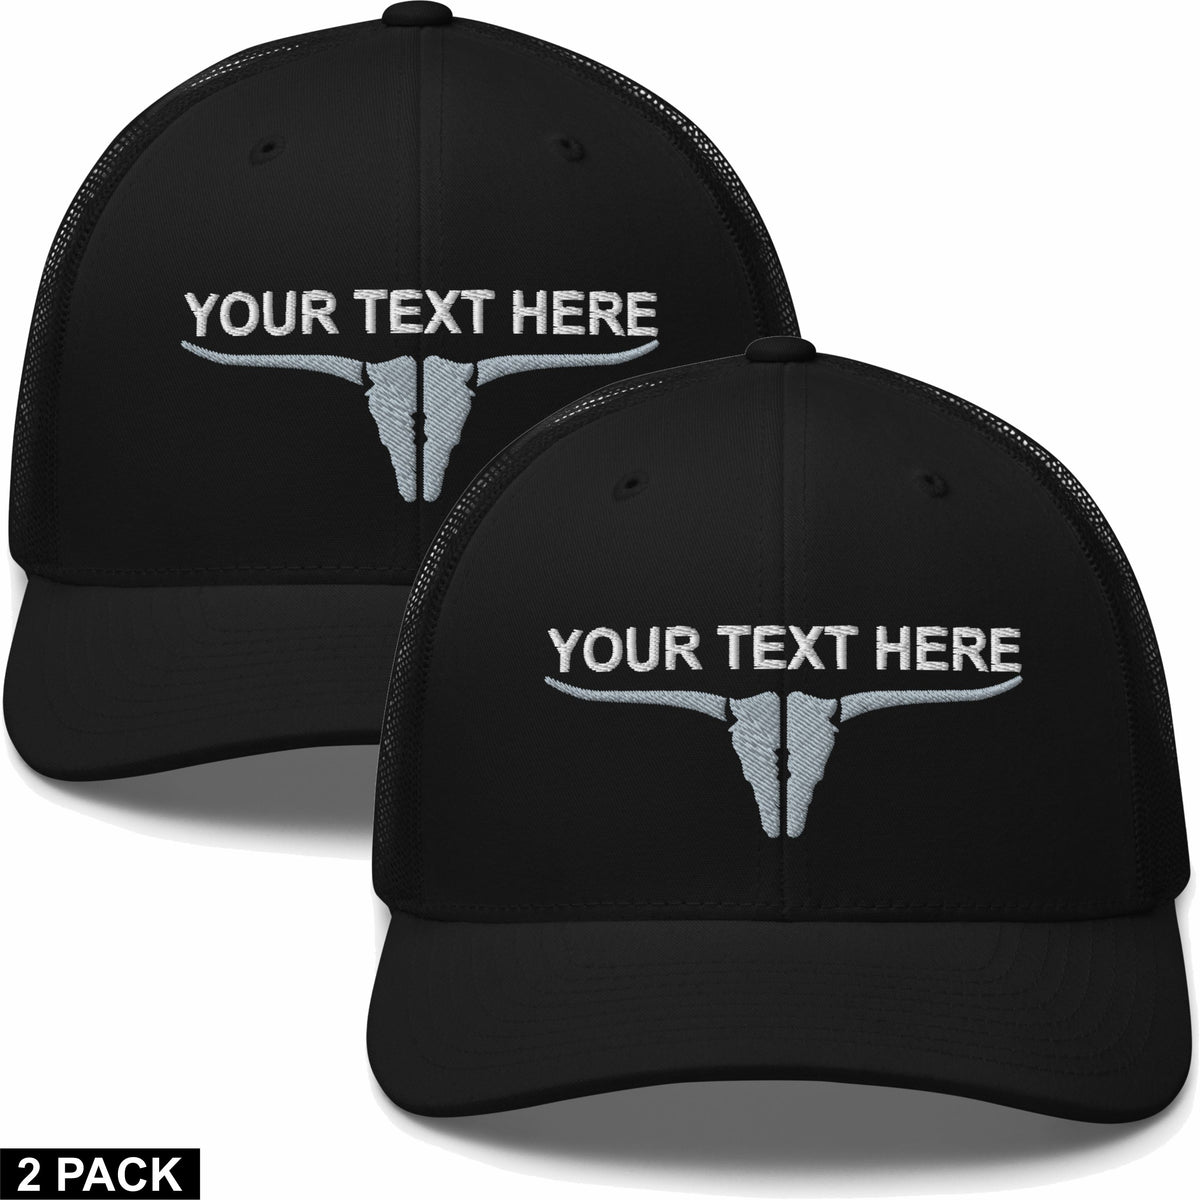 2 Embroidered Hats - Bull Skull Split - Your Text Here - Free Shipping